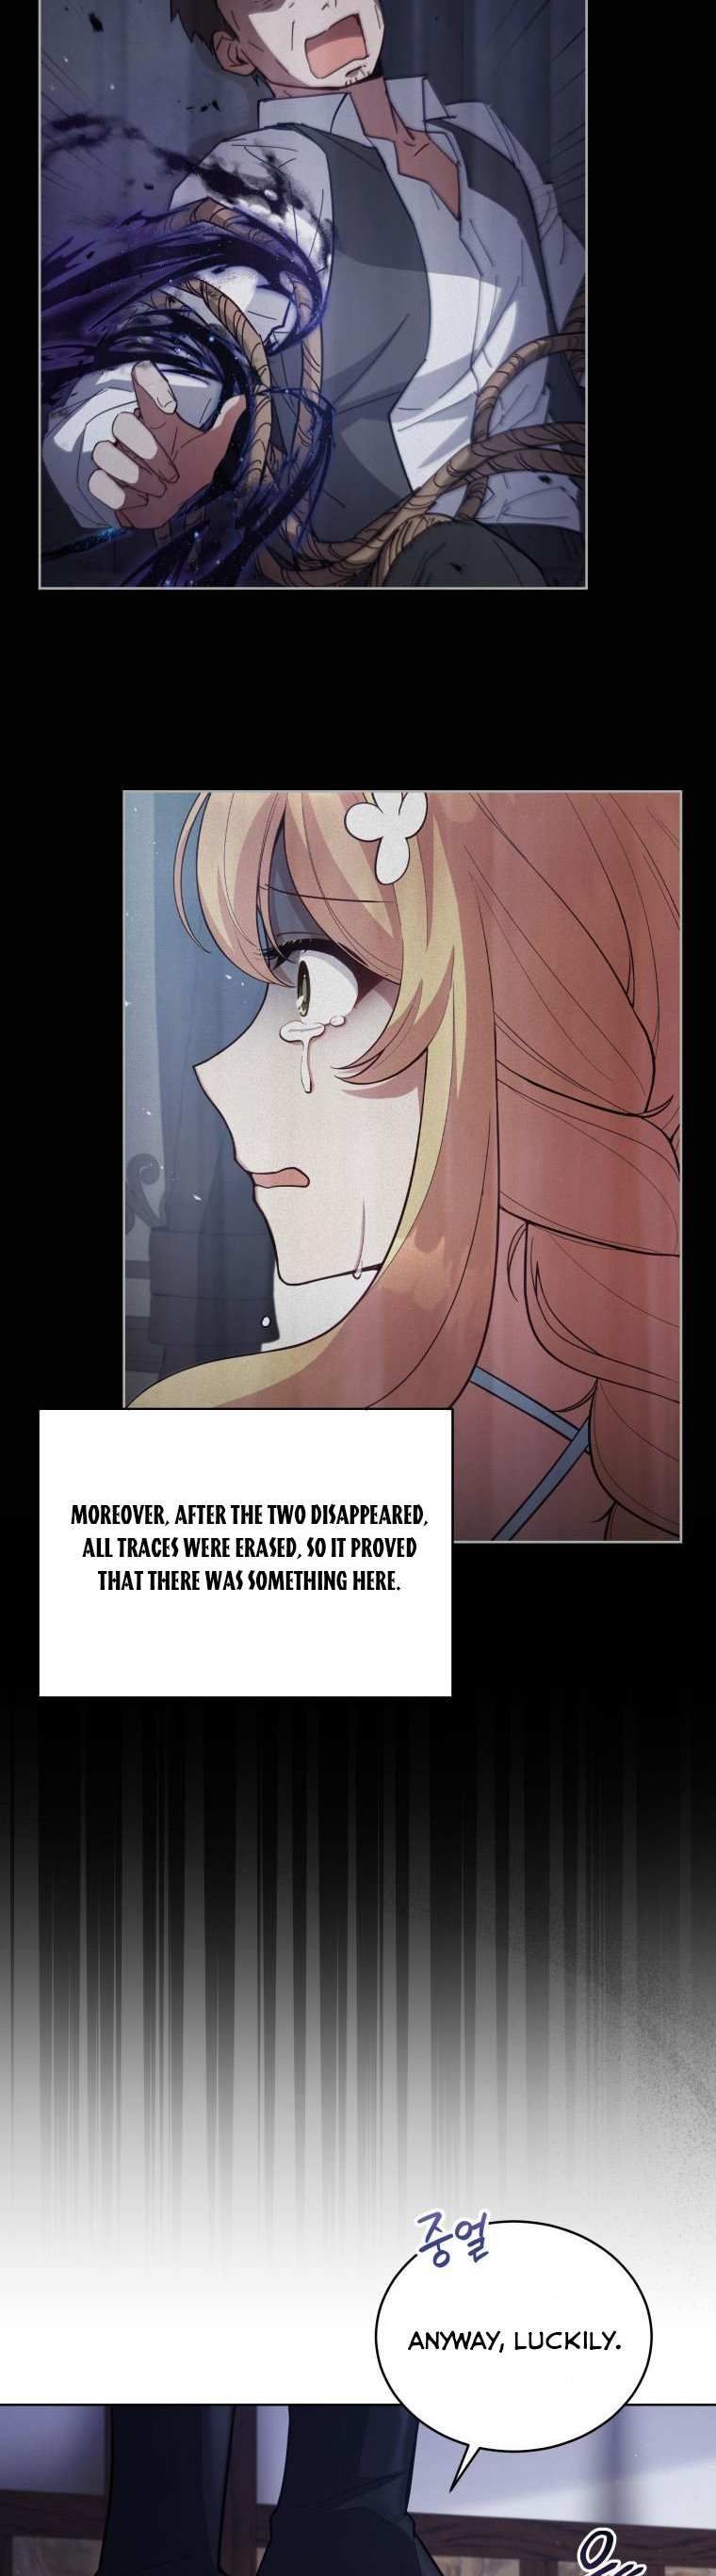 Untouchable Lady Chapter 90 page 5